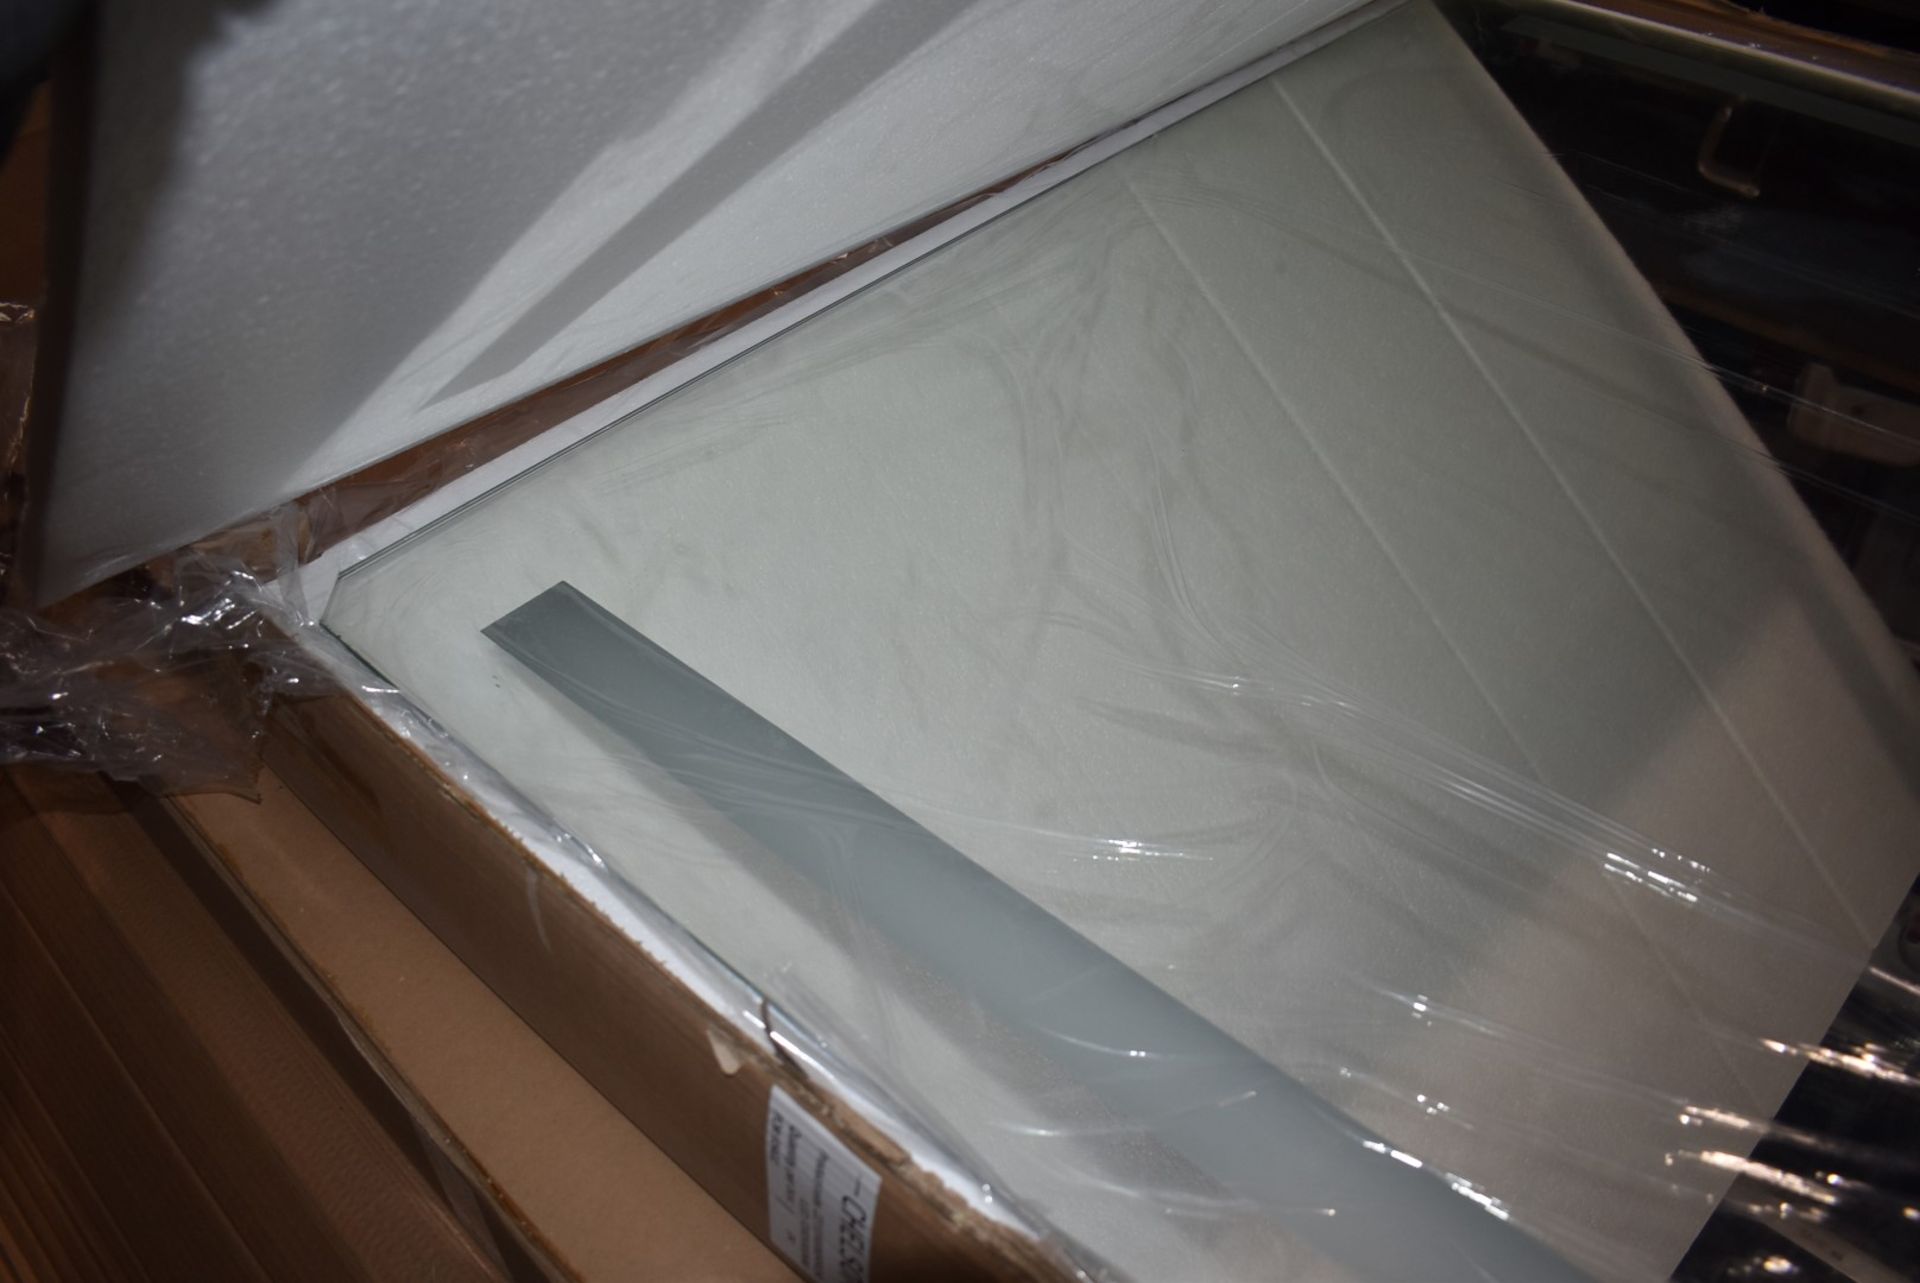 1 x Chelsom Large Illuminated LED Bathroom Mirror With Demister - Brand New Stock - As Used in Major - Image 5 of 10